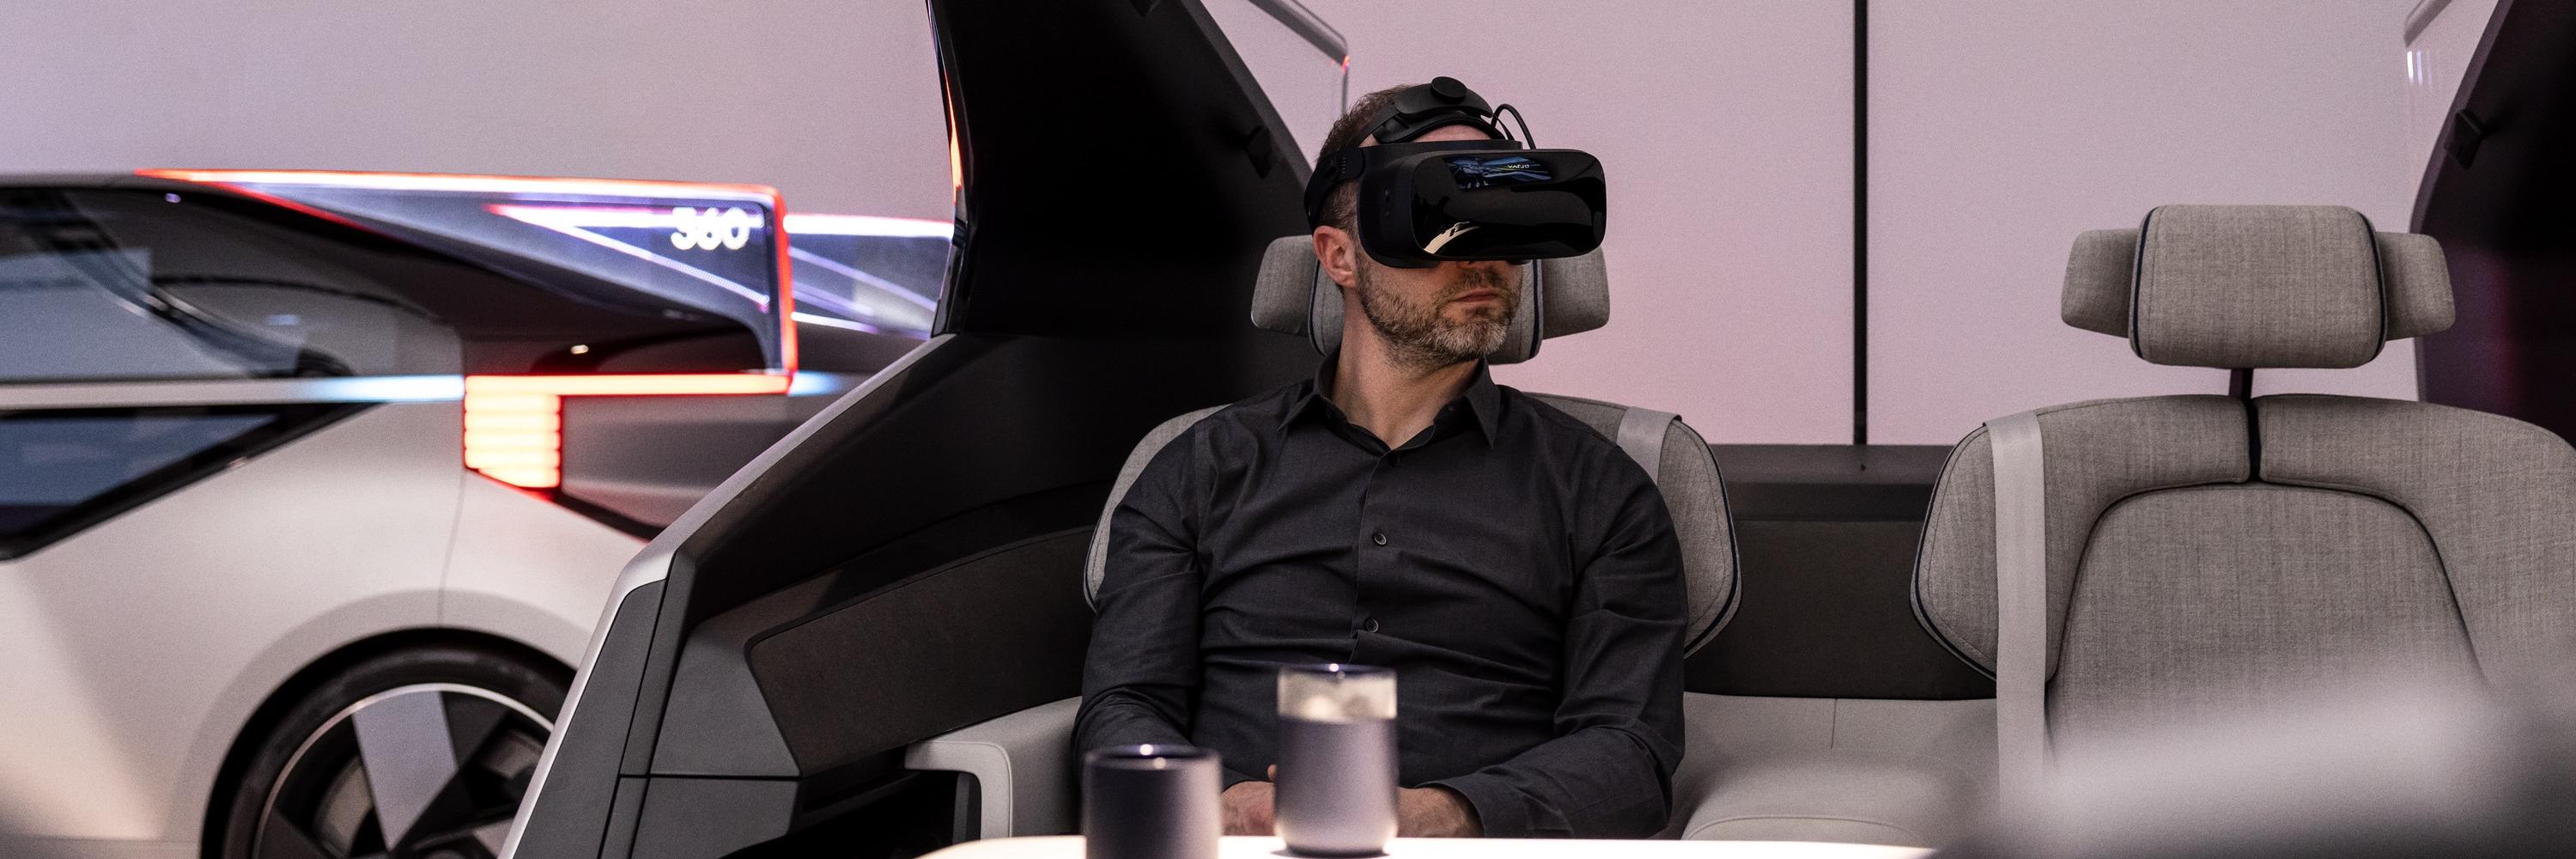 Person wears a mixed reality headset while seated inside a partial car cockpit.